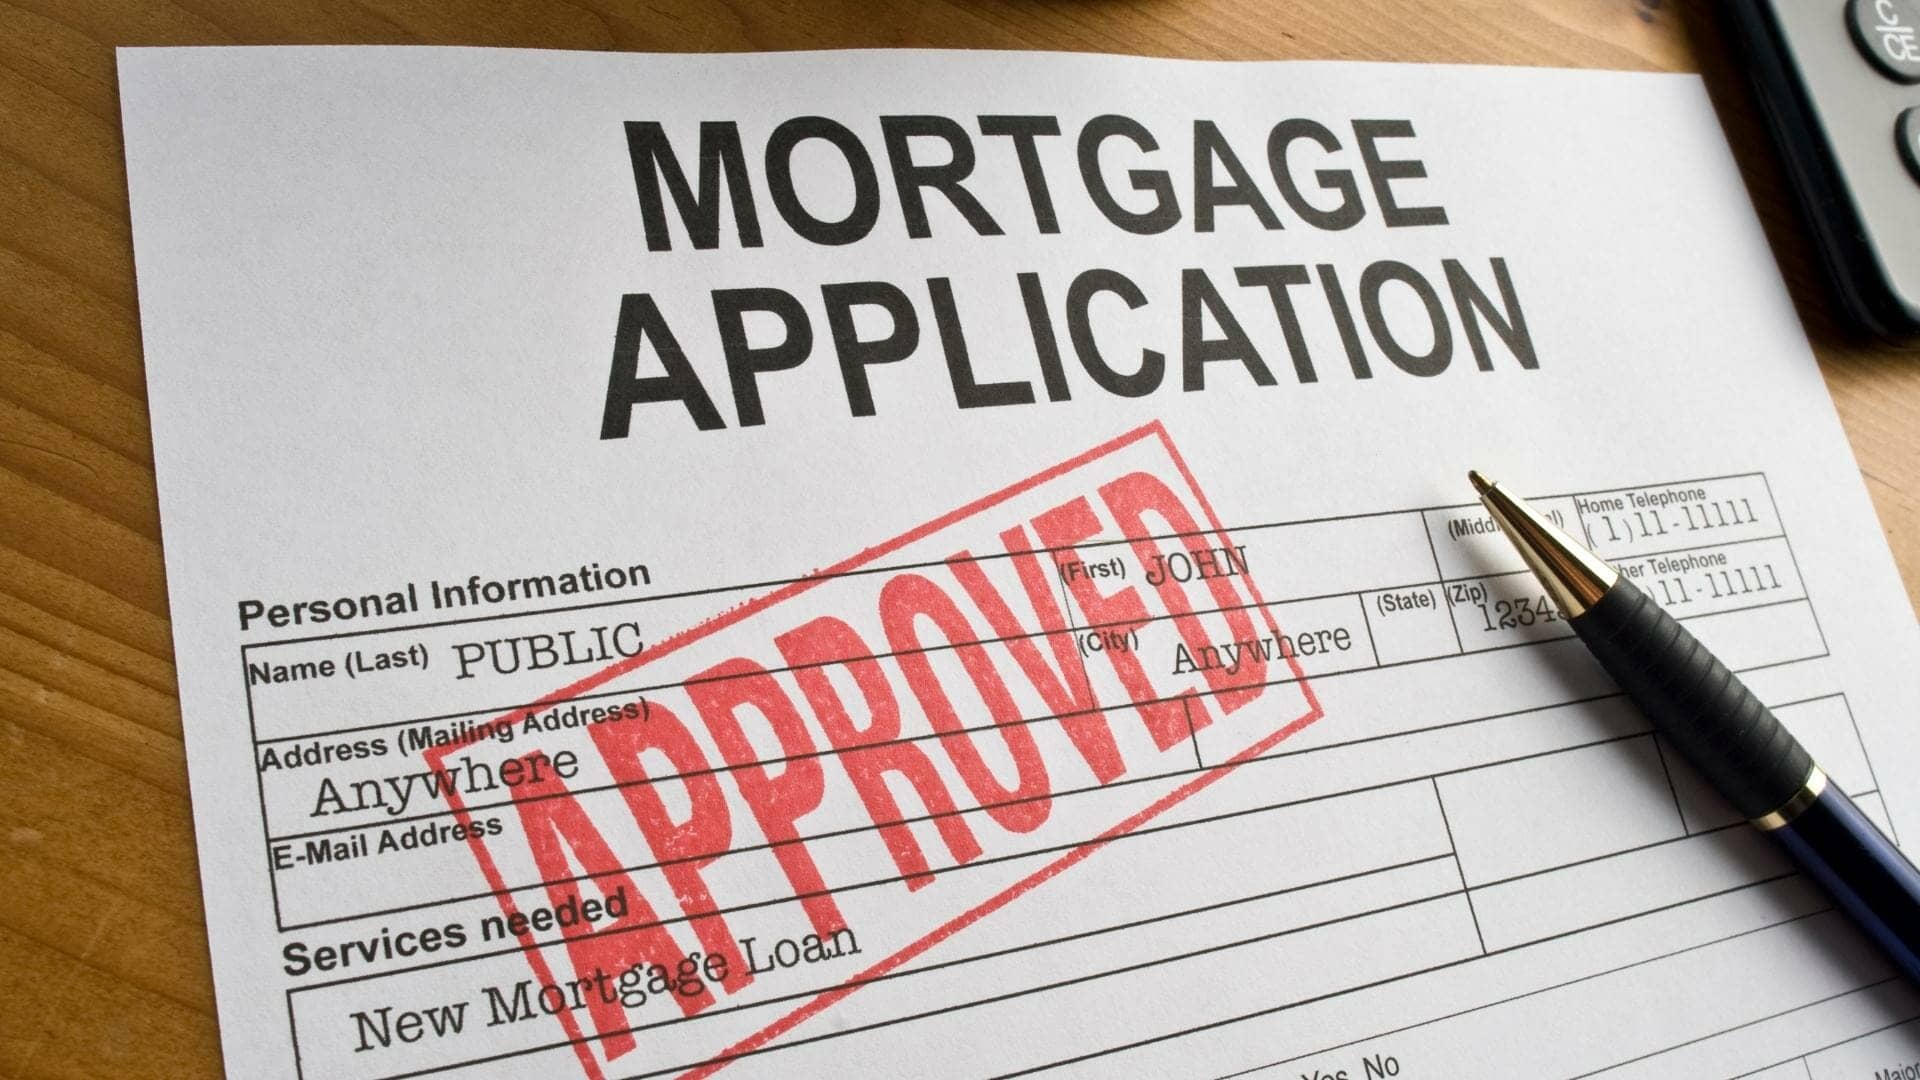 Choosing the right lender for your mortgage pre-approval